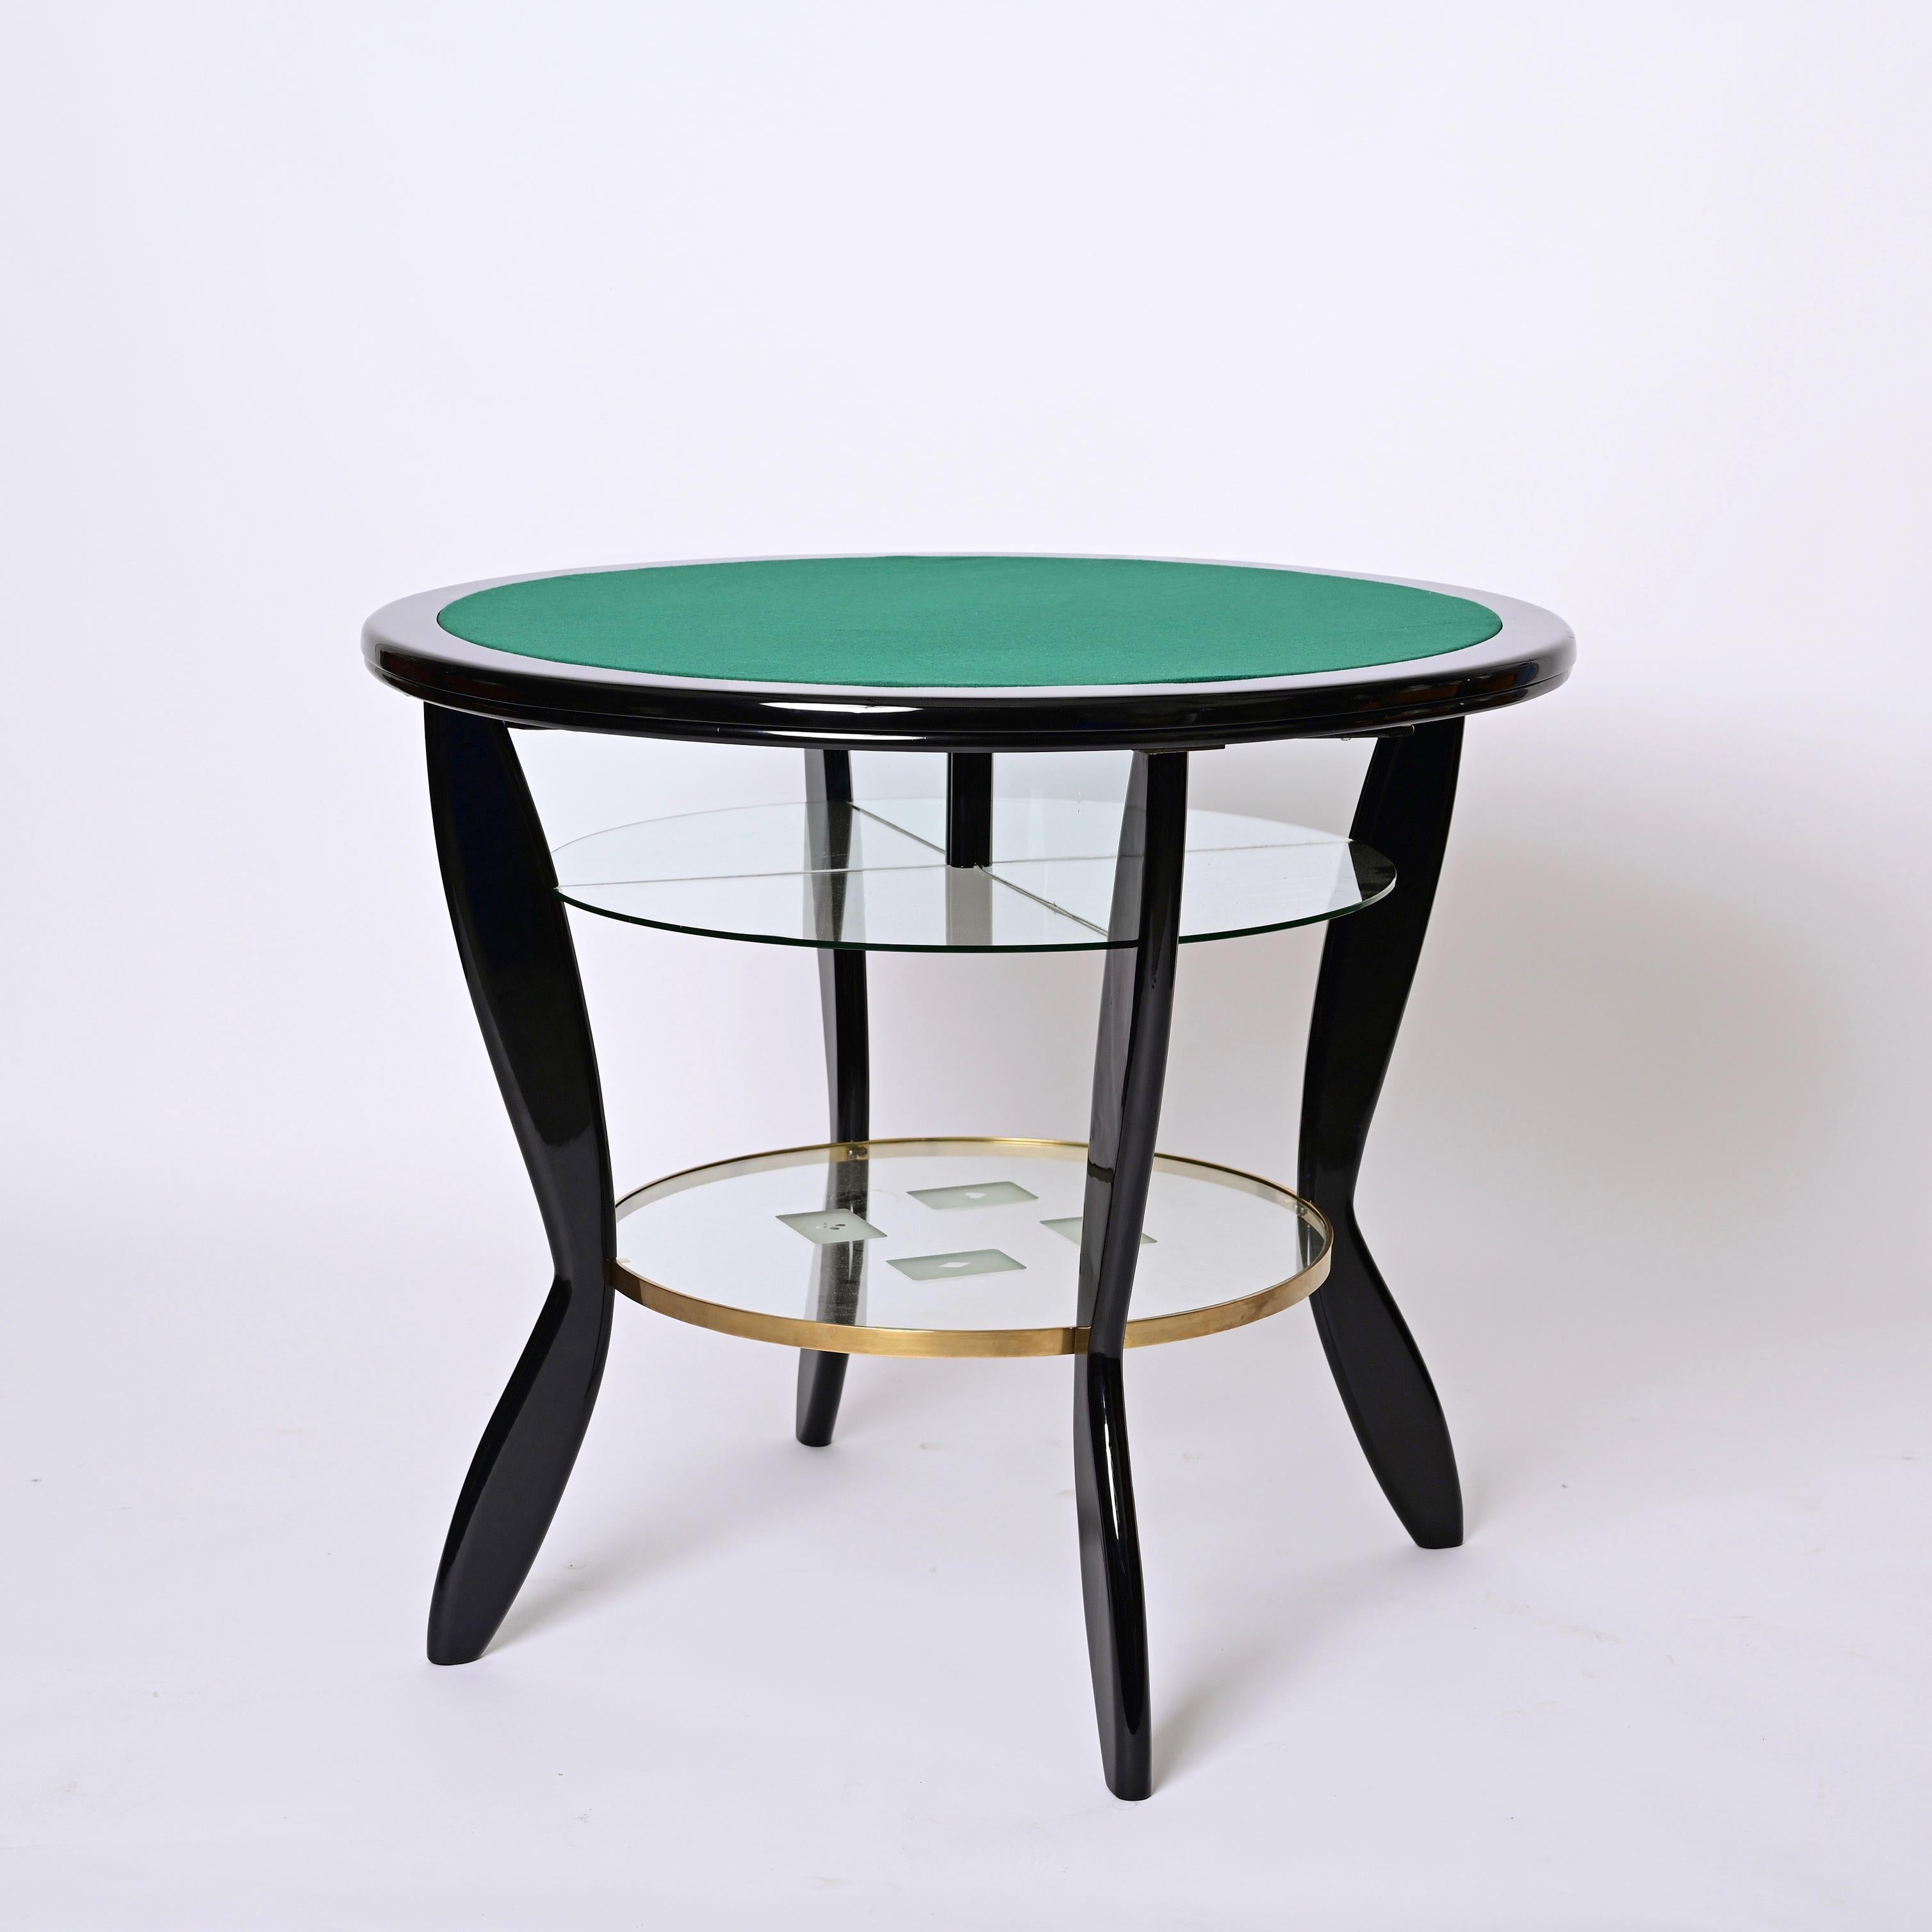 Gio Ponti Style Ebonized Beech and Brass Italian Game Table with Glass, 1950s For Sale 6